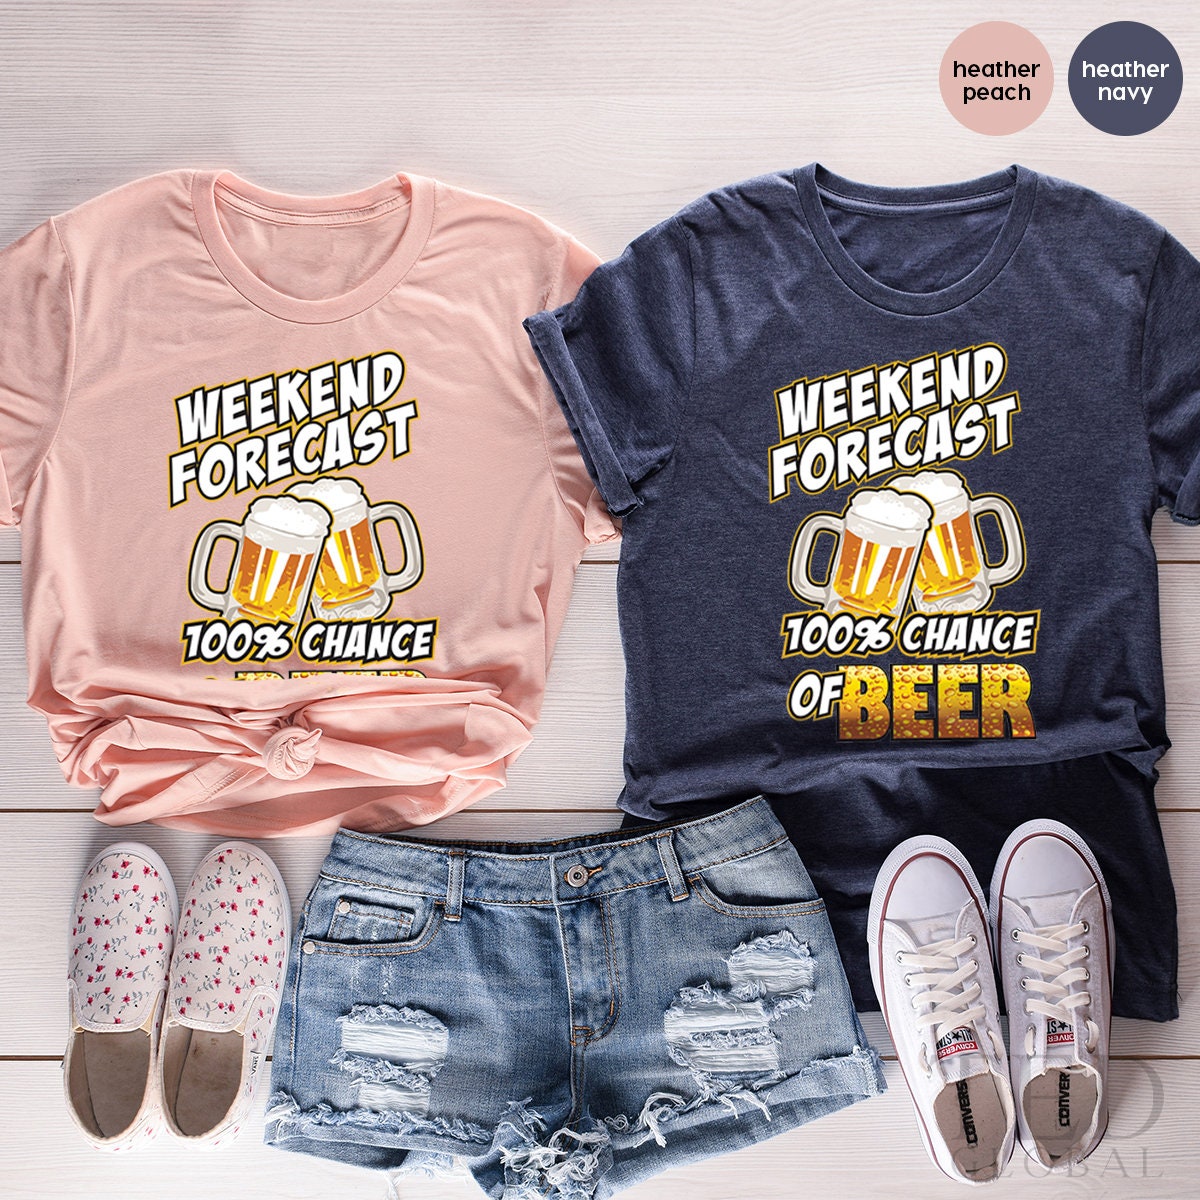 Day Drinking Shirt,Weekend Shirt,Beer T Shirt,Alcohol Shirt,Weekend Forecast %100 Chance Of Beer Shirt,Beer Shirt,Beer Lovers Shirt - Fastdeliverytees.com